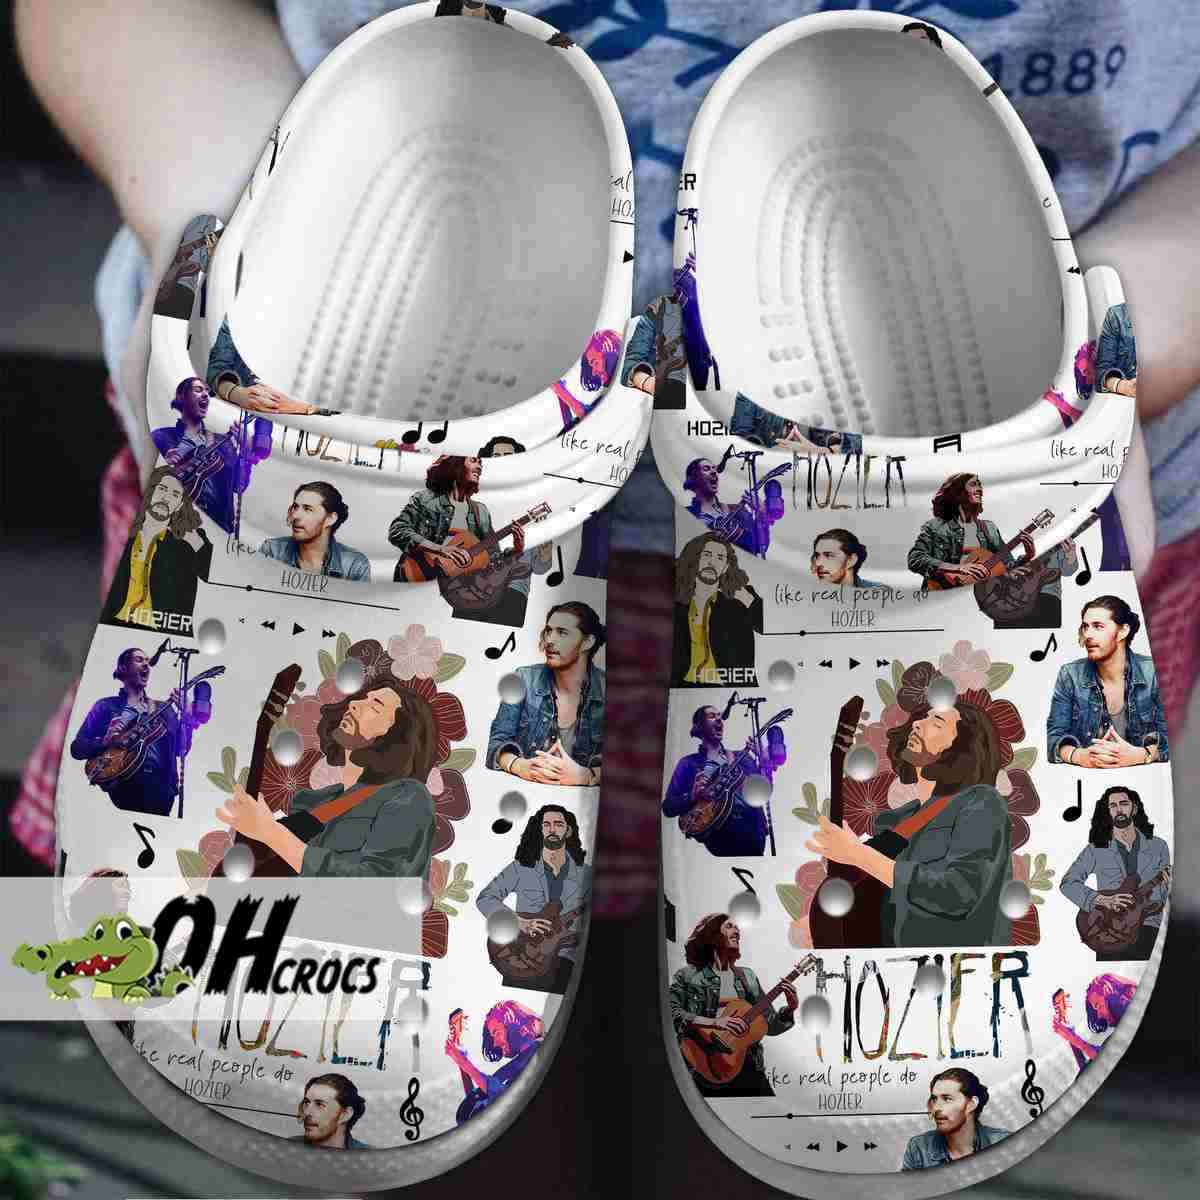 Hozier Themed Crocs Comfort Clog Shoes for Music Lovers 3